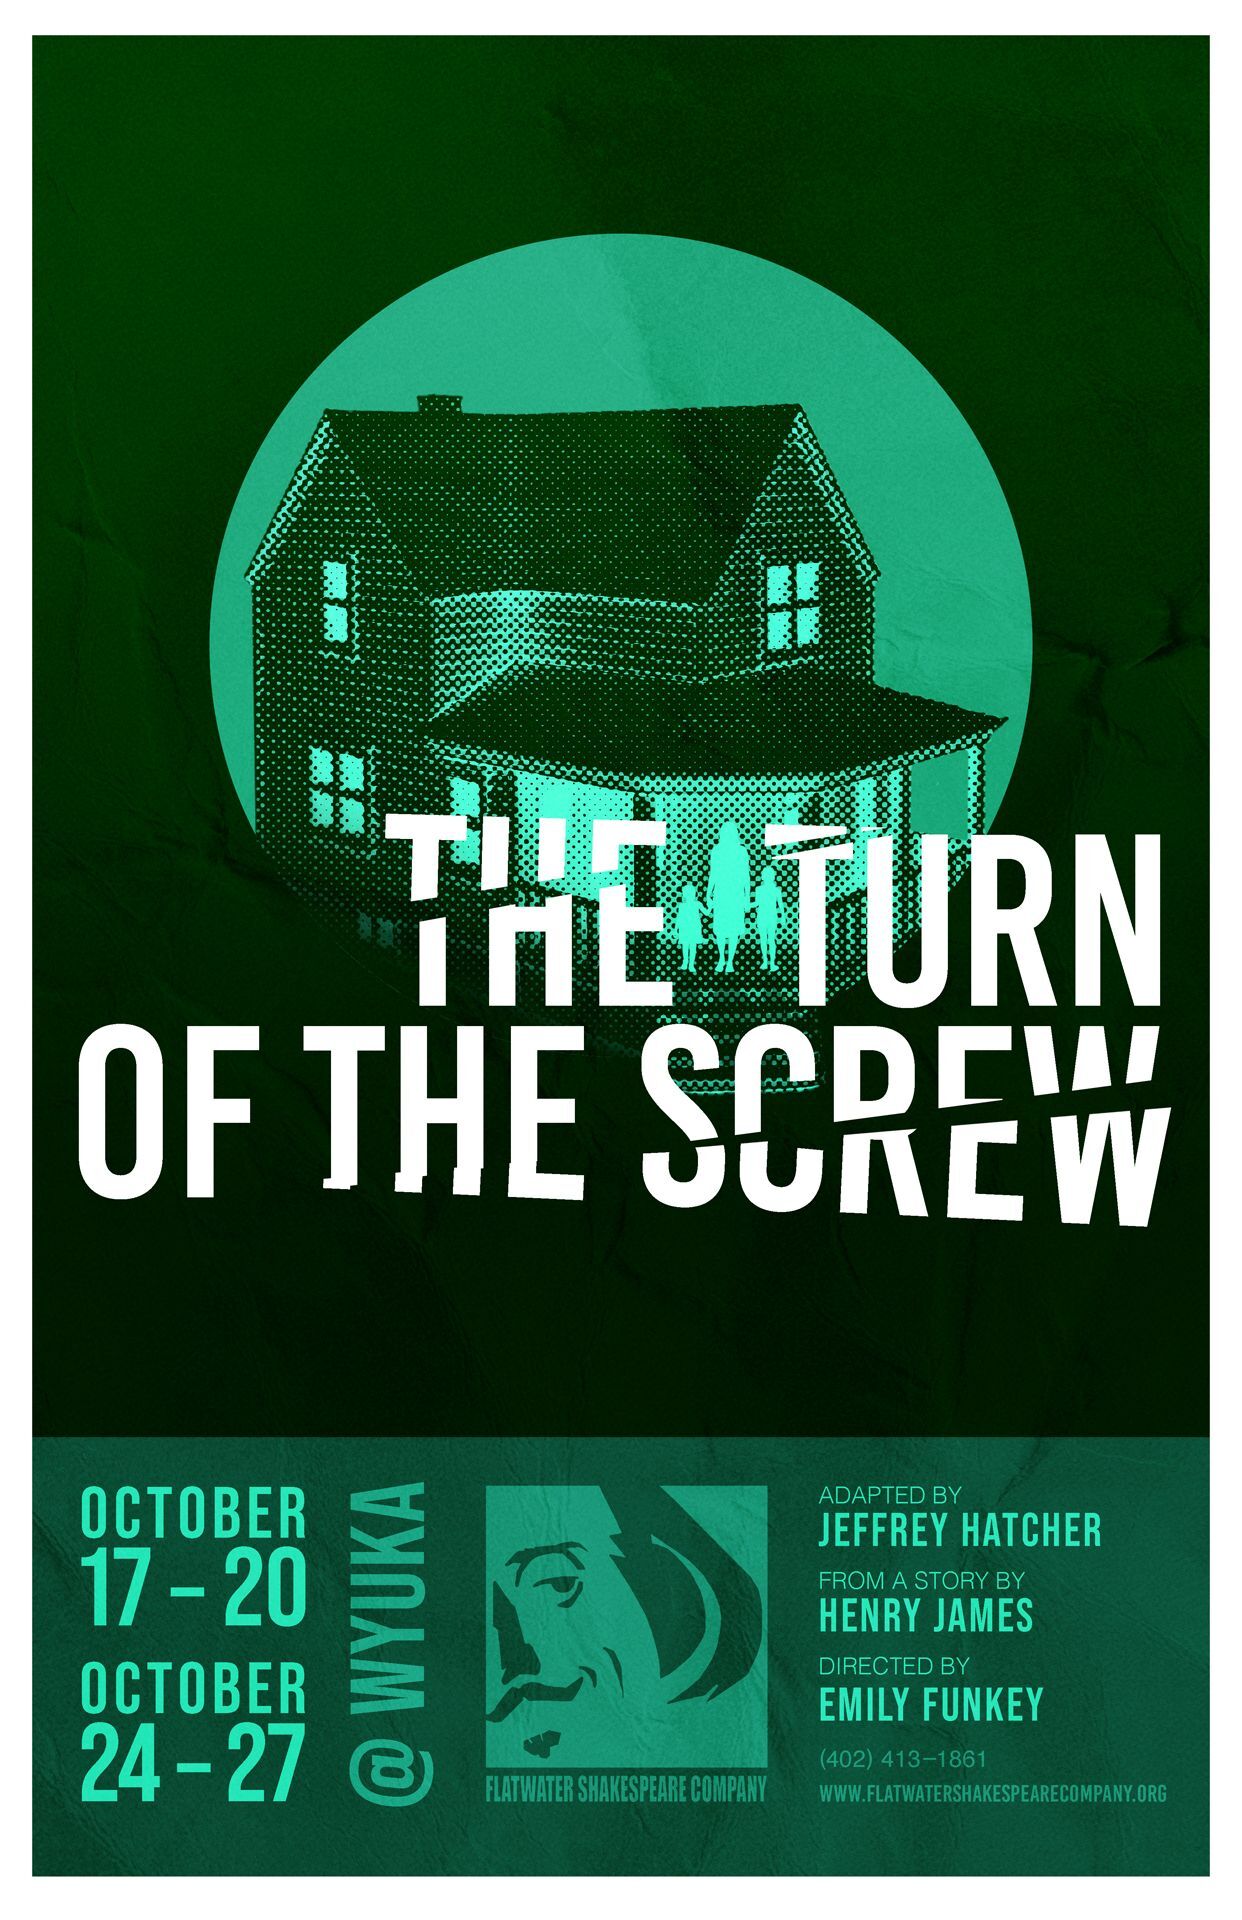 Learn More About The Turn Of The Screw